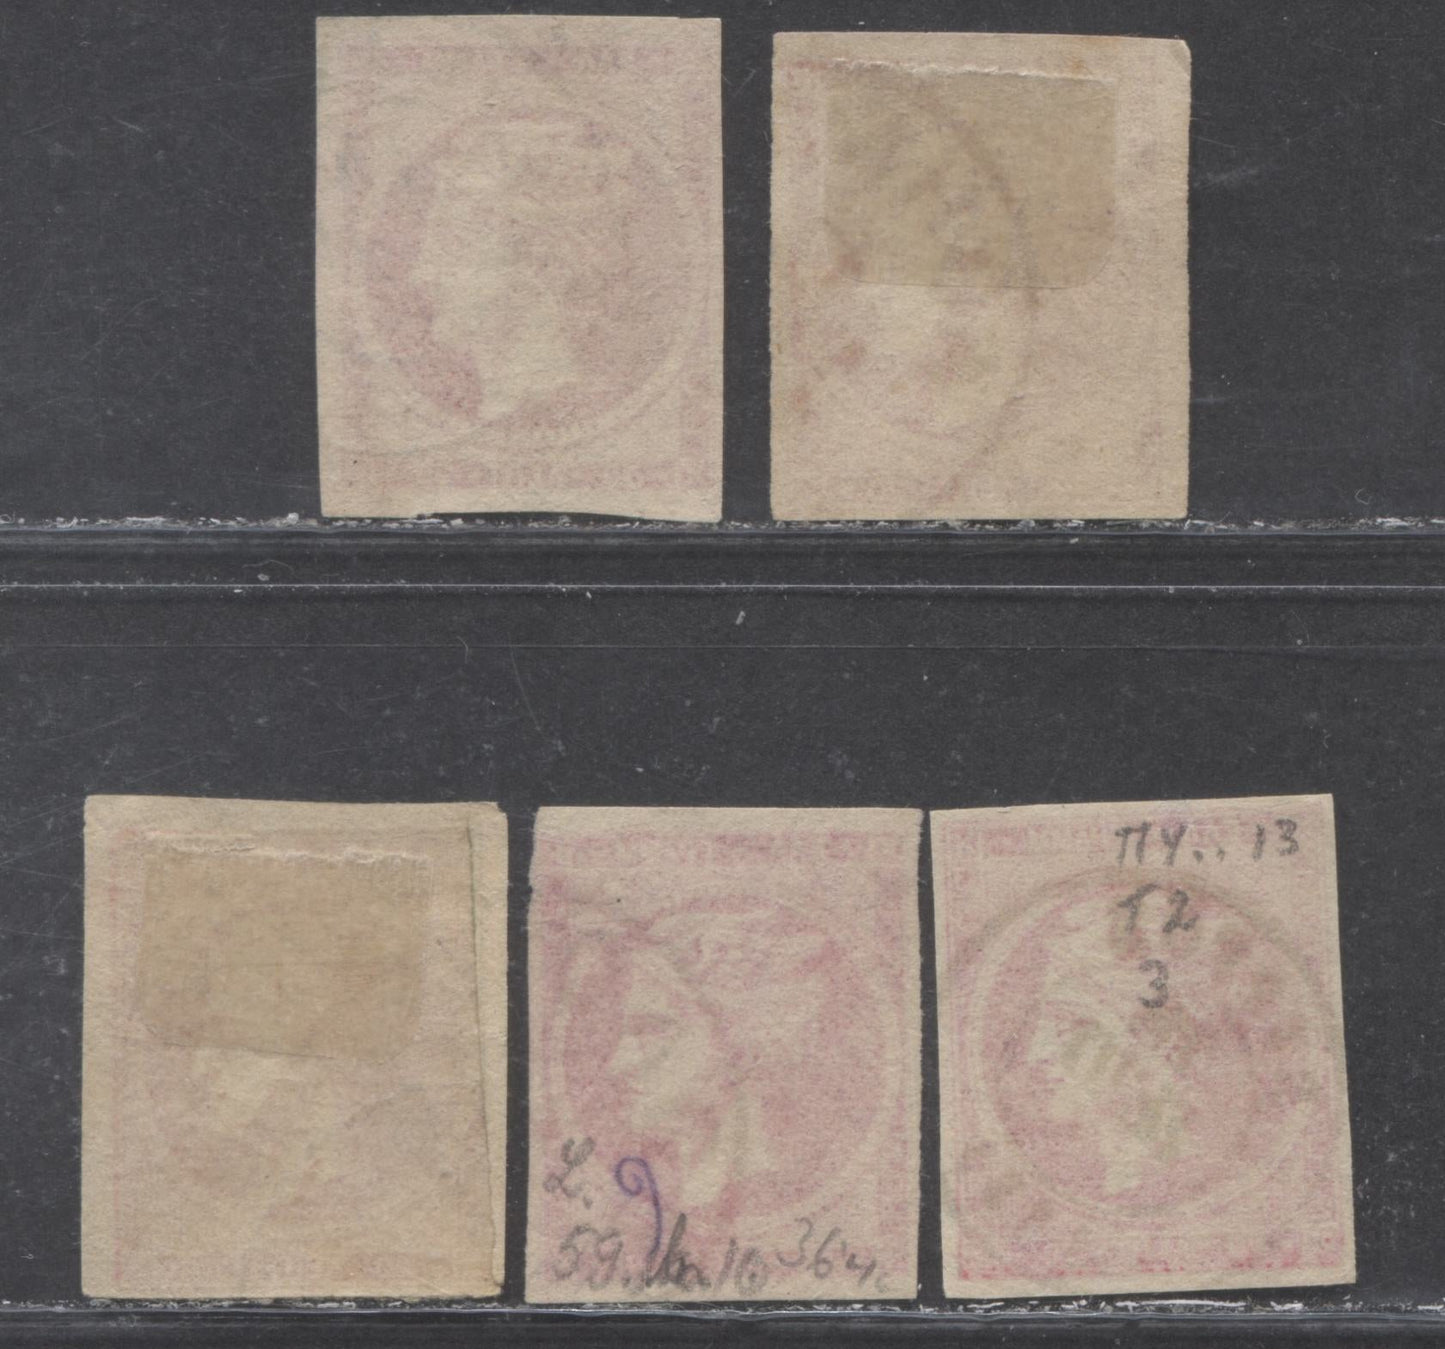 Lot 89 Greece SC#56a 20l Rose On Cream Paper, No Control Number 1880-1886 Large Hermes Head Issue, Regular & Aniline Ink Shade Group, 5 Fine Used Examples, Click on Listing to See ALL Pictures, Estimated Value $20 USD